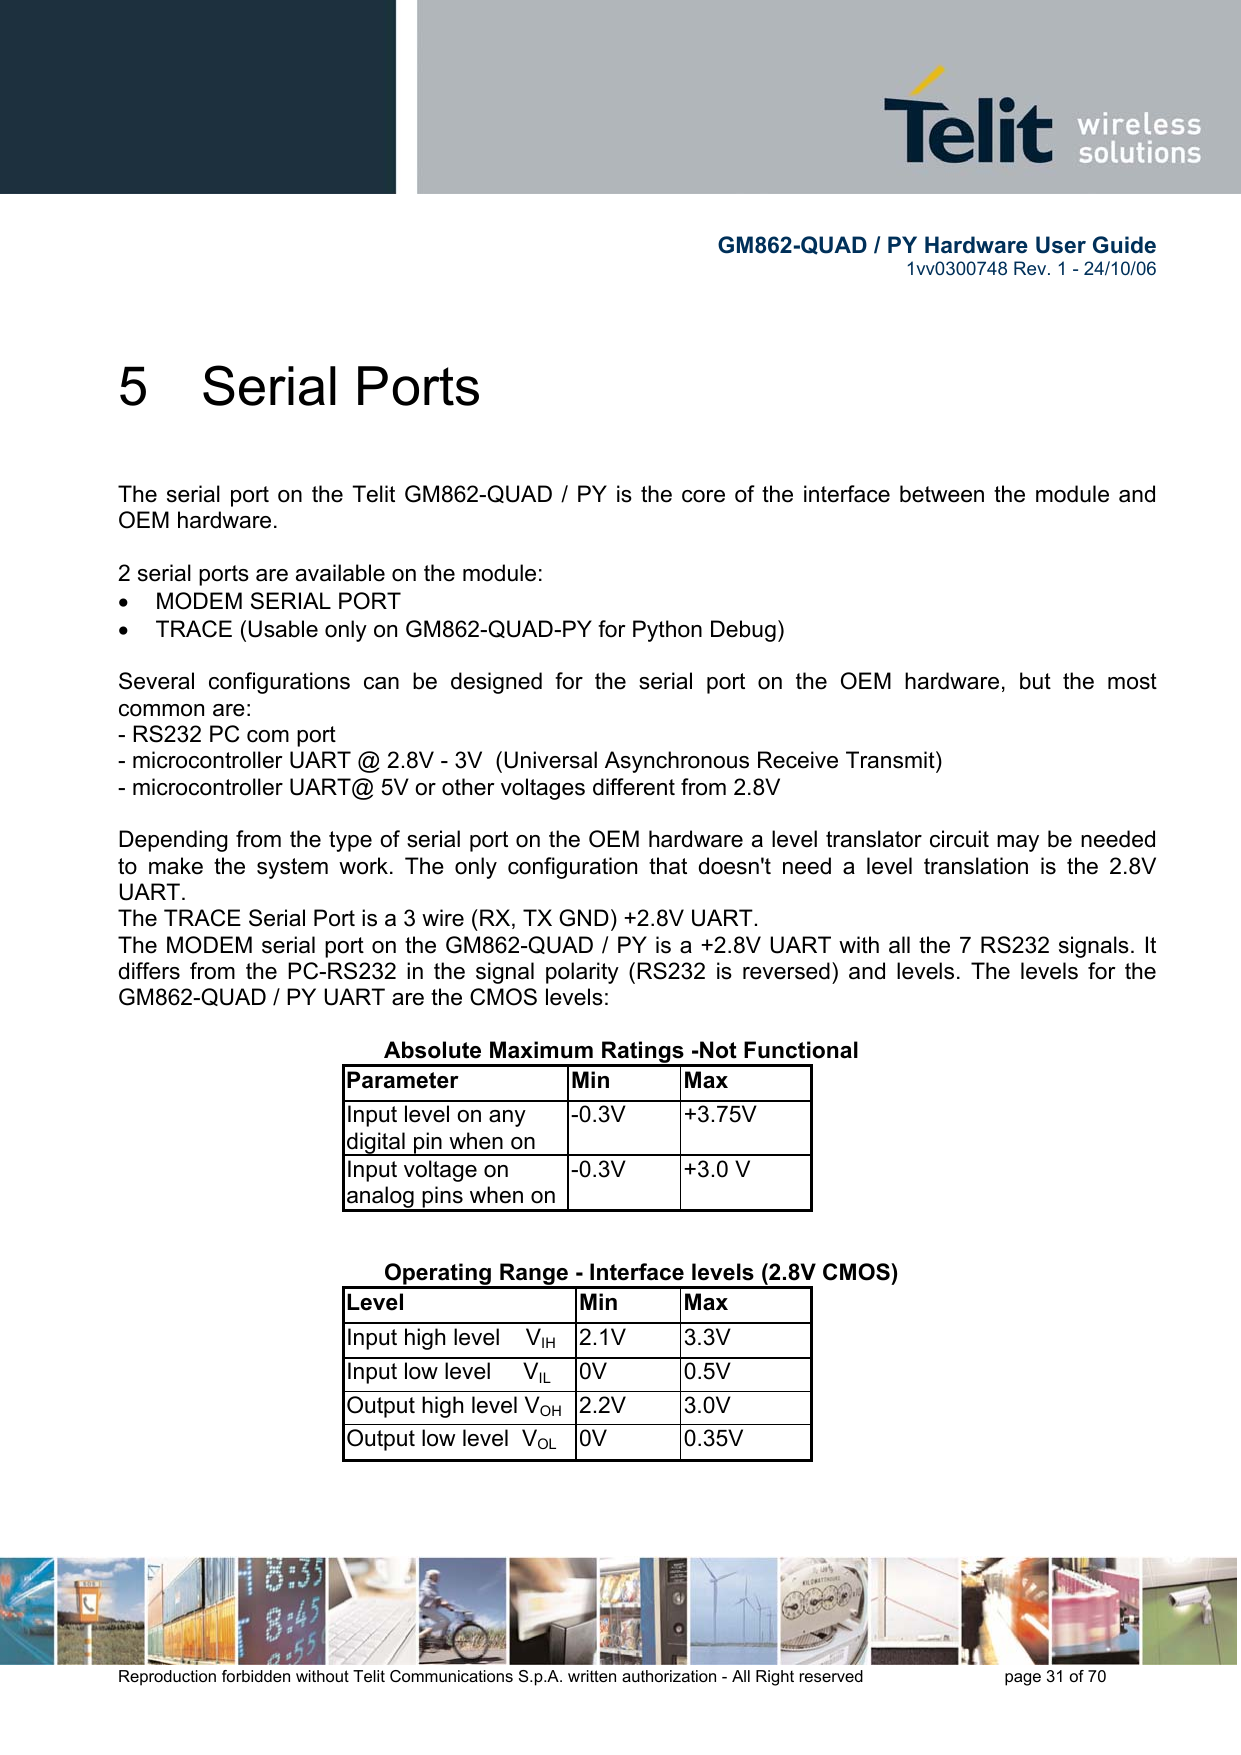        GM862-QUAD / PY Hardware User Guide   1vv0300748 Rev. 1 - 24/10/06    Reproduction forbidden without Telit Communications S.p.A. written authorization - All Right reserved    page 31 of 70  5 Serial Ports  The serial port on the Telit GM862-QUAD / PY is the core of the interface between the module and OEM hardware.   2 serial ports are available on the module: •  MODEM SERIAL PORT •  TRACE (Usable only on GM862-QUAD-PY for Python Debug)  Several configurations can be designed for the serial port on the OEM hardware, but the most common are: - RS232 PC com port - microcontroller UART @ 2.8V - 3V  (Universal Asynchronous Receive Transmit)  - microcontroller UART@ 5V or other voltages different from 2.8V   Depending from the type of serial port on the OEM hardware a level translator circuit may be needed to make the system work. The only configuration that doesn&apos;t need a level translation is the 2.8V UART. The TRACE Serial Port is a 3 wire (RX, TX GND) +2.8V UART. The MODEM serial port on the GM862-QUAD / PY is a +2.8V UART with all the 7 RS232 signals. It differs from the PC-RS232 in the signal polarity (RS232 is reversed) and levels. The levels for the GM862-QUAD / PY UART are the CMOS levels:     Absolute Maximum Ratings -Not Functional Parameter Min Max Input level on any digital pin when on -0.3V +3.75V Input voltage on analog pins when on-0.3V +3.0 V      Operating Range - Interface levels (2.8V CMOS) Level Min Max Input high level    VIH  2.1V 3.3V Input low level     VIL 0V  0.5V Output high level VOH 2.2V  3.0V Output low level  VOL 0V  0.35V    